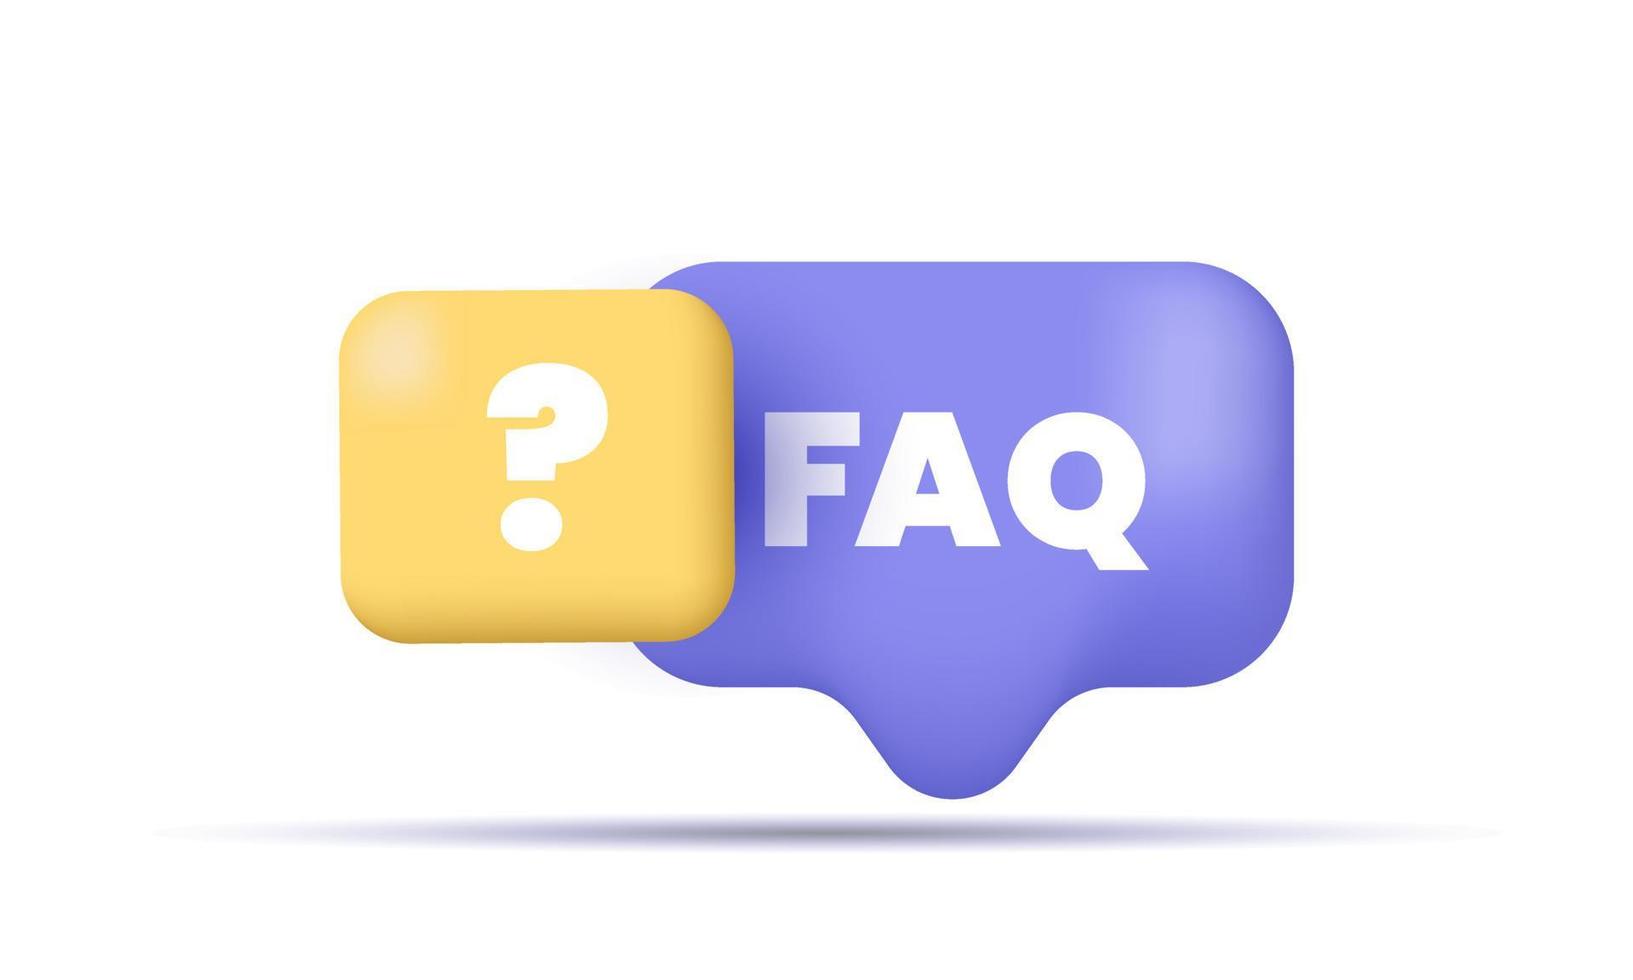 Frequently Asked Questions, FAQ